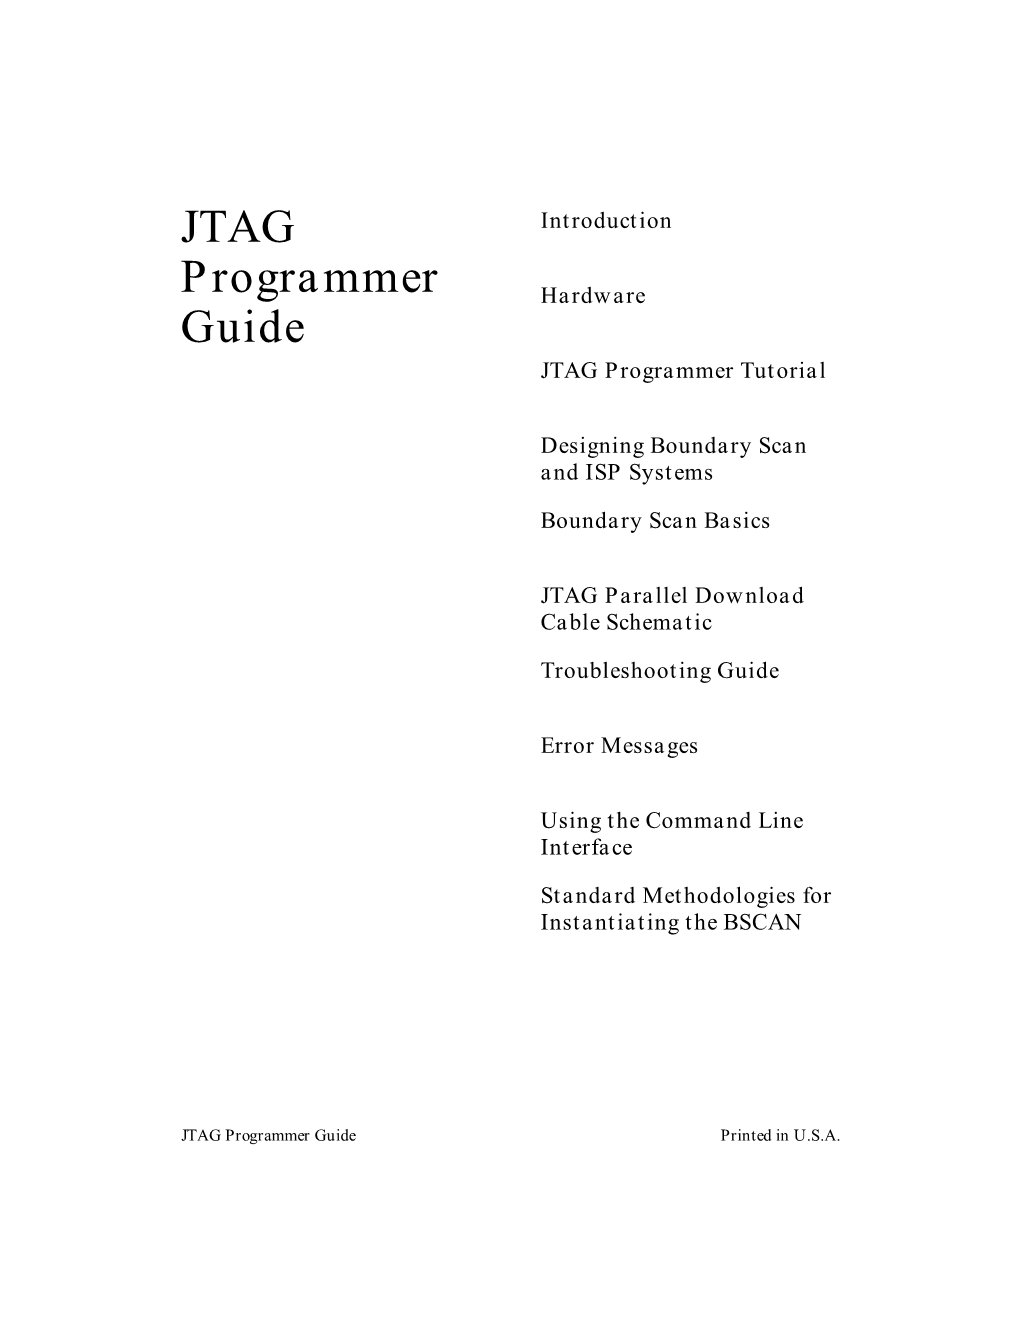 JTAG Programmer Guide Printed in U.S.A